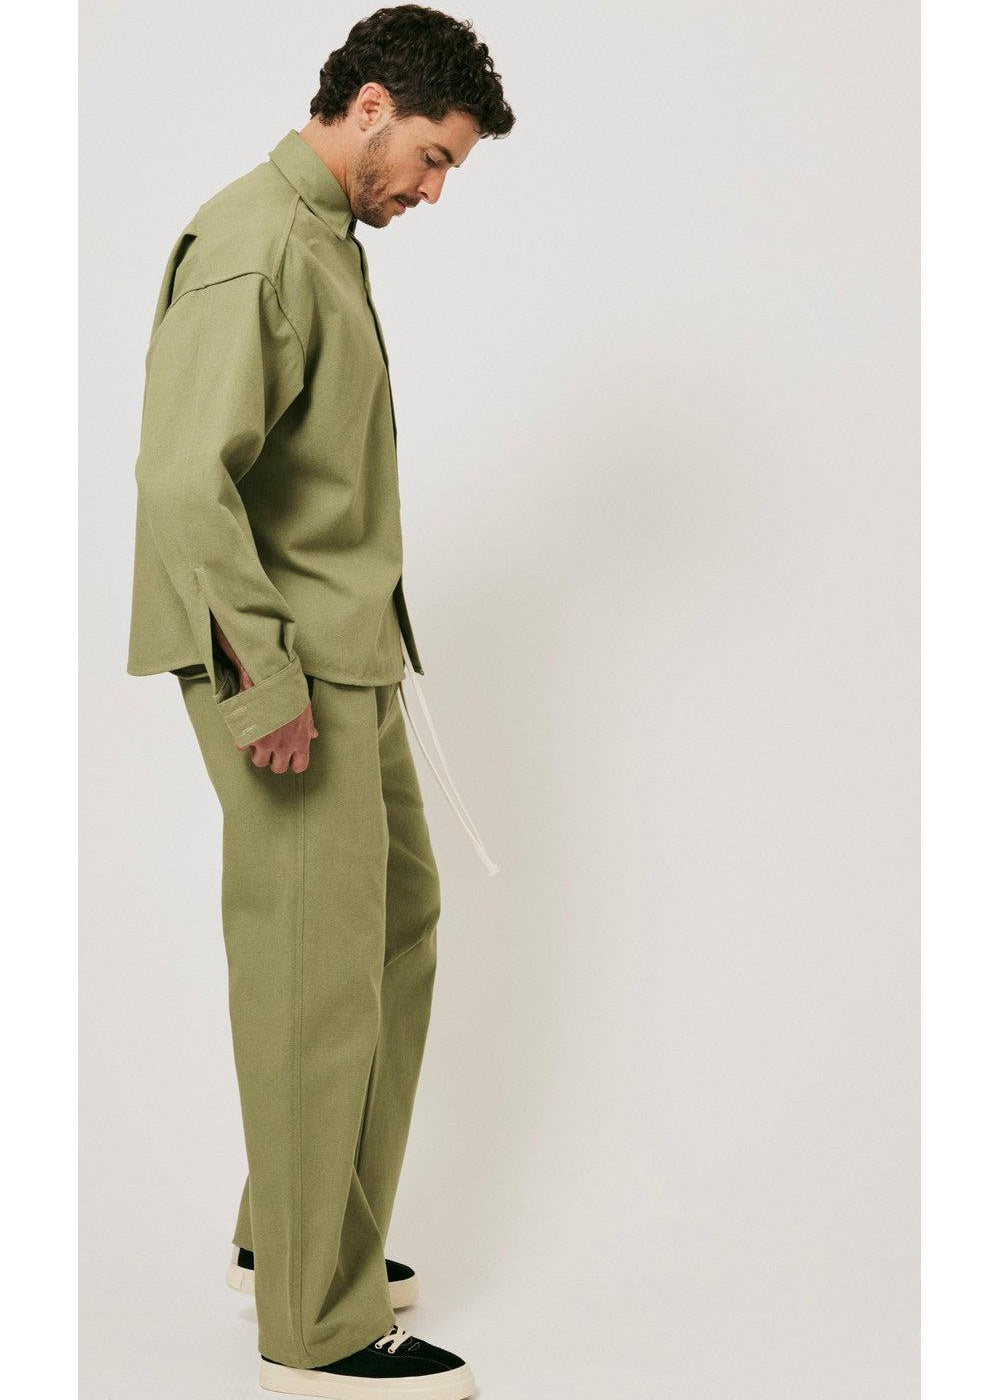 Solace Theory - Cotton Canvas Shirt / Militia | SOLACE THEORY | Mad About The Boy